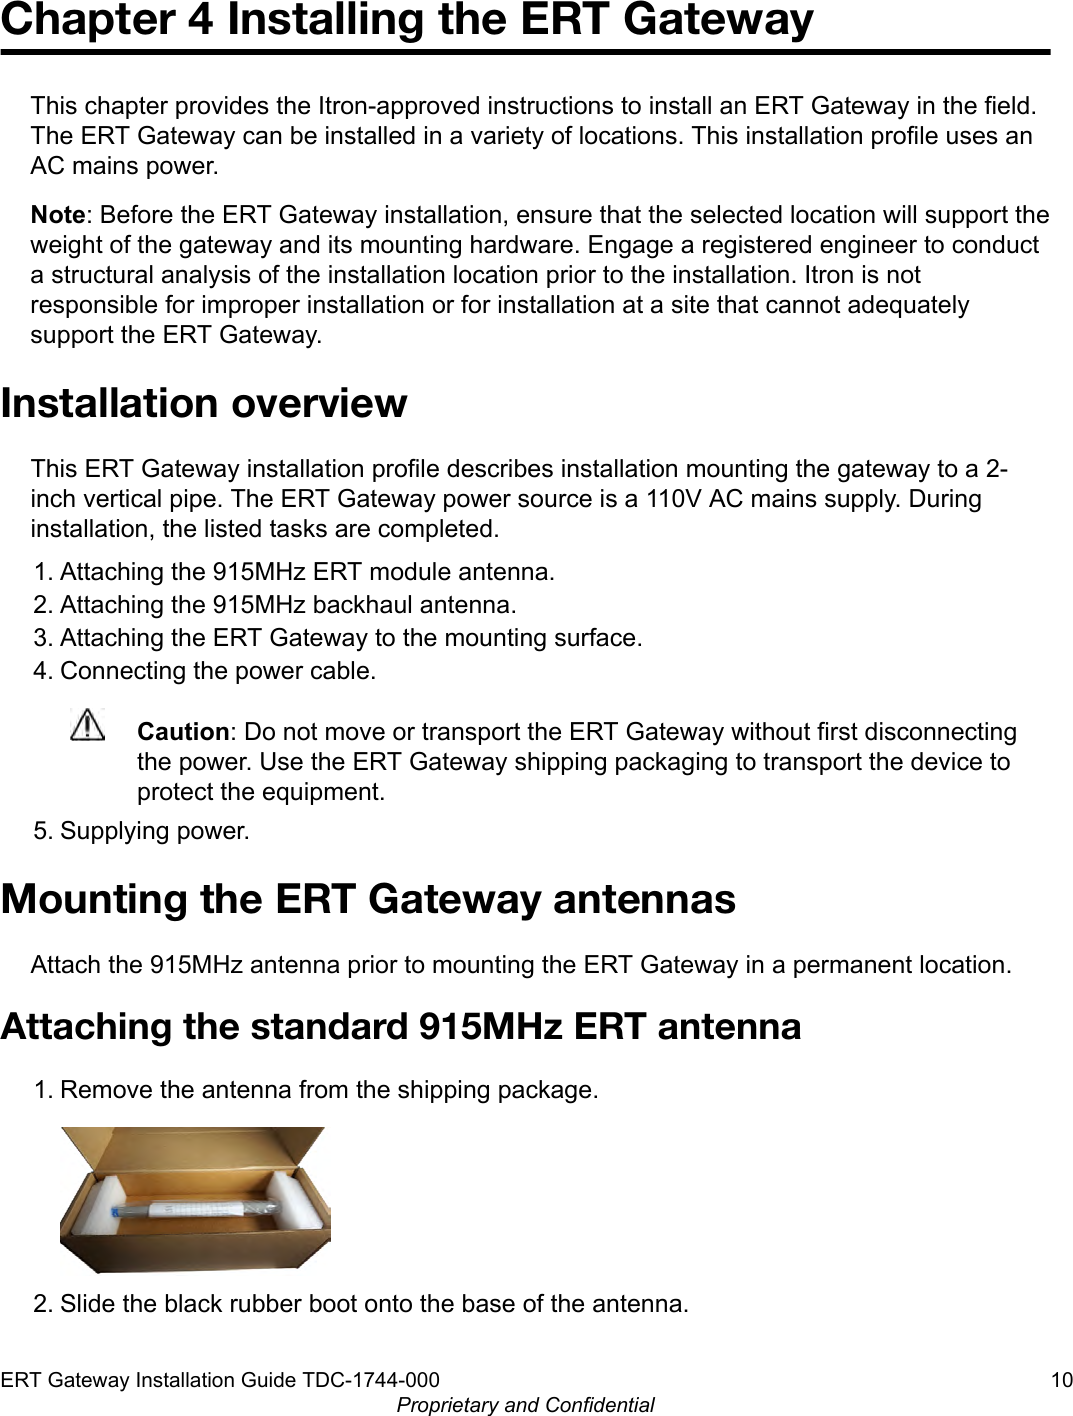 Chapter 4 Installing the ERT GatewayThis chapter provides the Itron-approved instructions to install an ERT Gateway in the field.The ERT Gateway can be installed in a variety of locations. This installation profile uses anAC mains power.Note: Before the ERT Gateway installation, ensure that the selected location will support theweight of the gateway and its mounting hardware. Engage a registered engineer to conducta structural analysis of the installation location prior to the installation. Itron is notresponsible for improper installation or for installation at a site that cannot adequatelysupport the ERT Gateway.Installation overviewThis ERT Gateway installation profile describes installation mounting the gateway to a 2-inch vertical pipe. The ERT Gateway power source is a 110V AC mains supply. Duringinstallation, the listed tasks are completed.1. Attaching the 915MHz ERT module antenna.2. Attaching the 915MHz backhaul antenna.3. Attaching the ERT Gateway to the mounting surface.4. Connecting the power cable.Caution: Do not move or transport the ERT Gateway without first disconnectingthe power. Use the ERT Gateway shipping packaging to transport the device toprotect the equipment.5. Supplying power.Mounting the ERT Gateway antennasAttach the 915MHz antenna prior to mounting the ERT Gateway in a permanent location.Attaching the standard 915MHz ERT antenna1. Remove the antenna from the shipping package.2. Slide the black rubber boot onto the base of the antenna.ERT Gateway Installation Guide TDC-1744-000 10Proprietary and Confidential